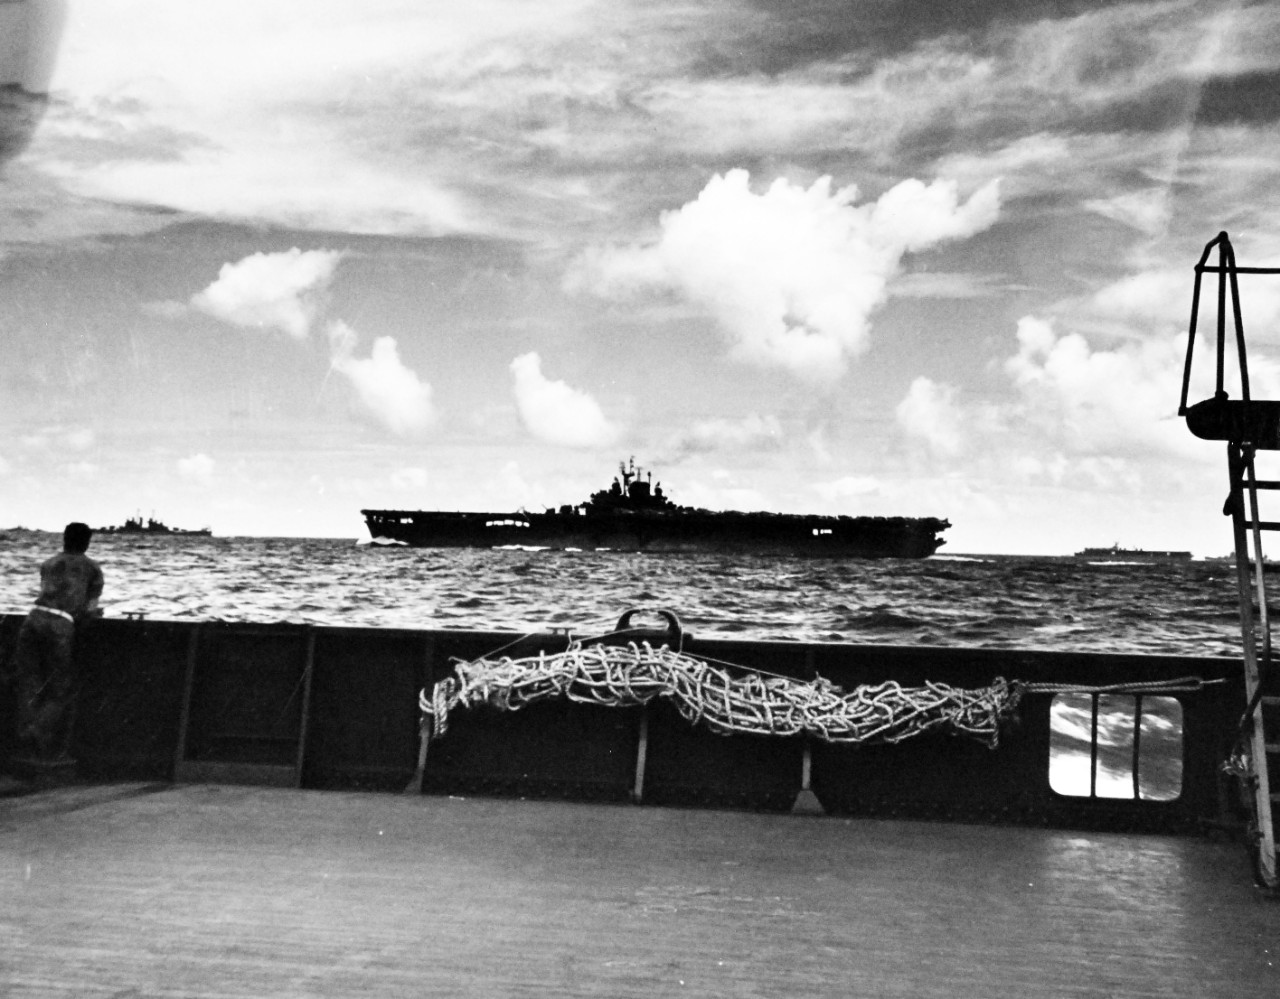 80-G-55346:  Wake Island Raid, October 5-6, 1943.     USS Lexington (CV 16), part of the Task Force that raided Wake Island, October 5, 1943.   Photographed by CPU-7.  U.S. Navy photograph, now in the collections of the National Archives.    (2015/04/28).